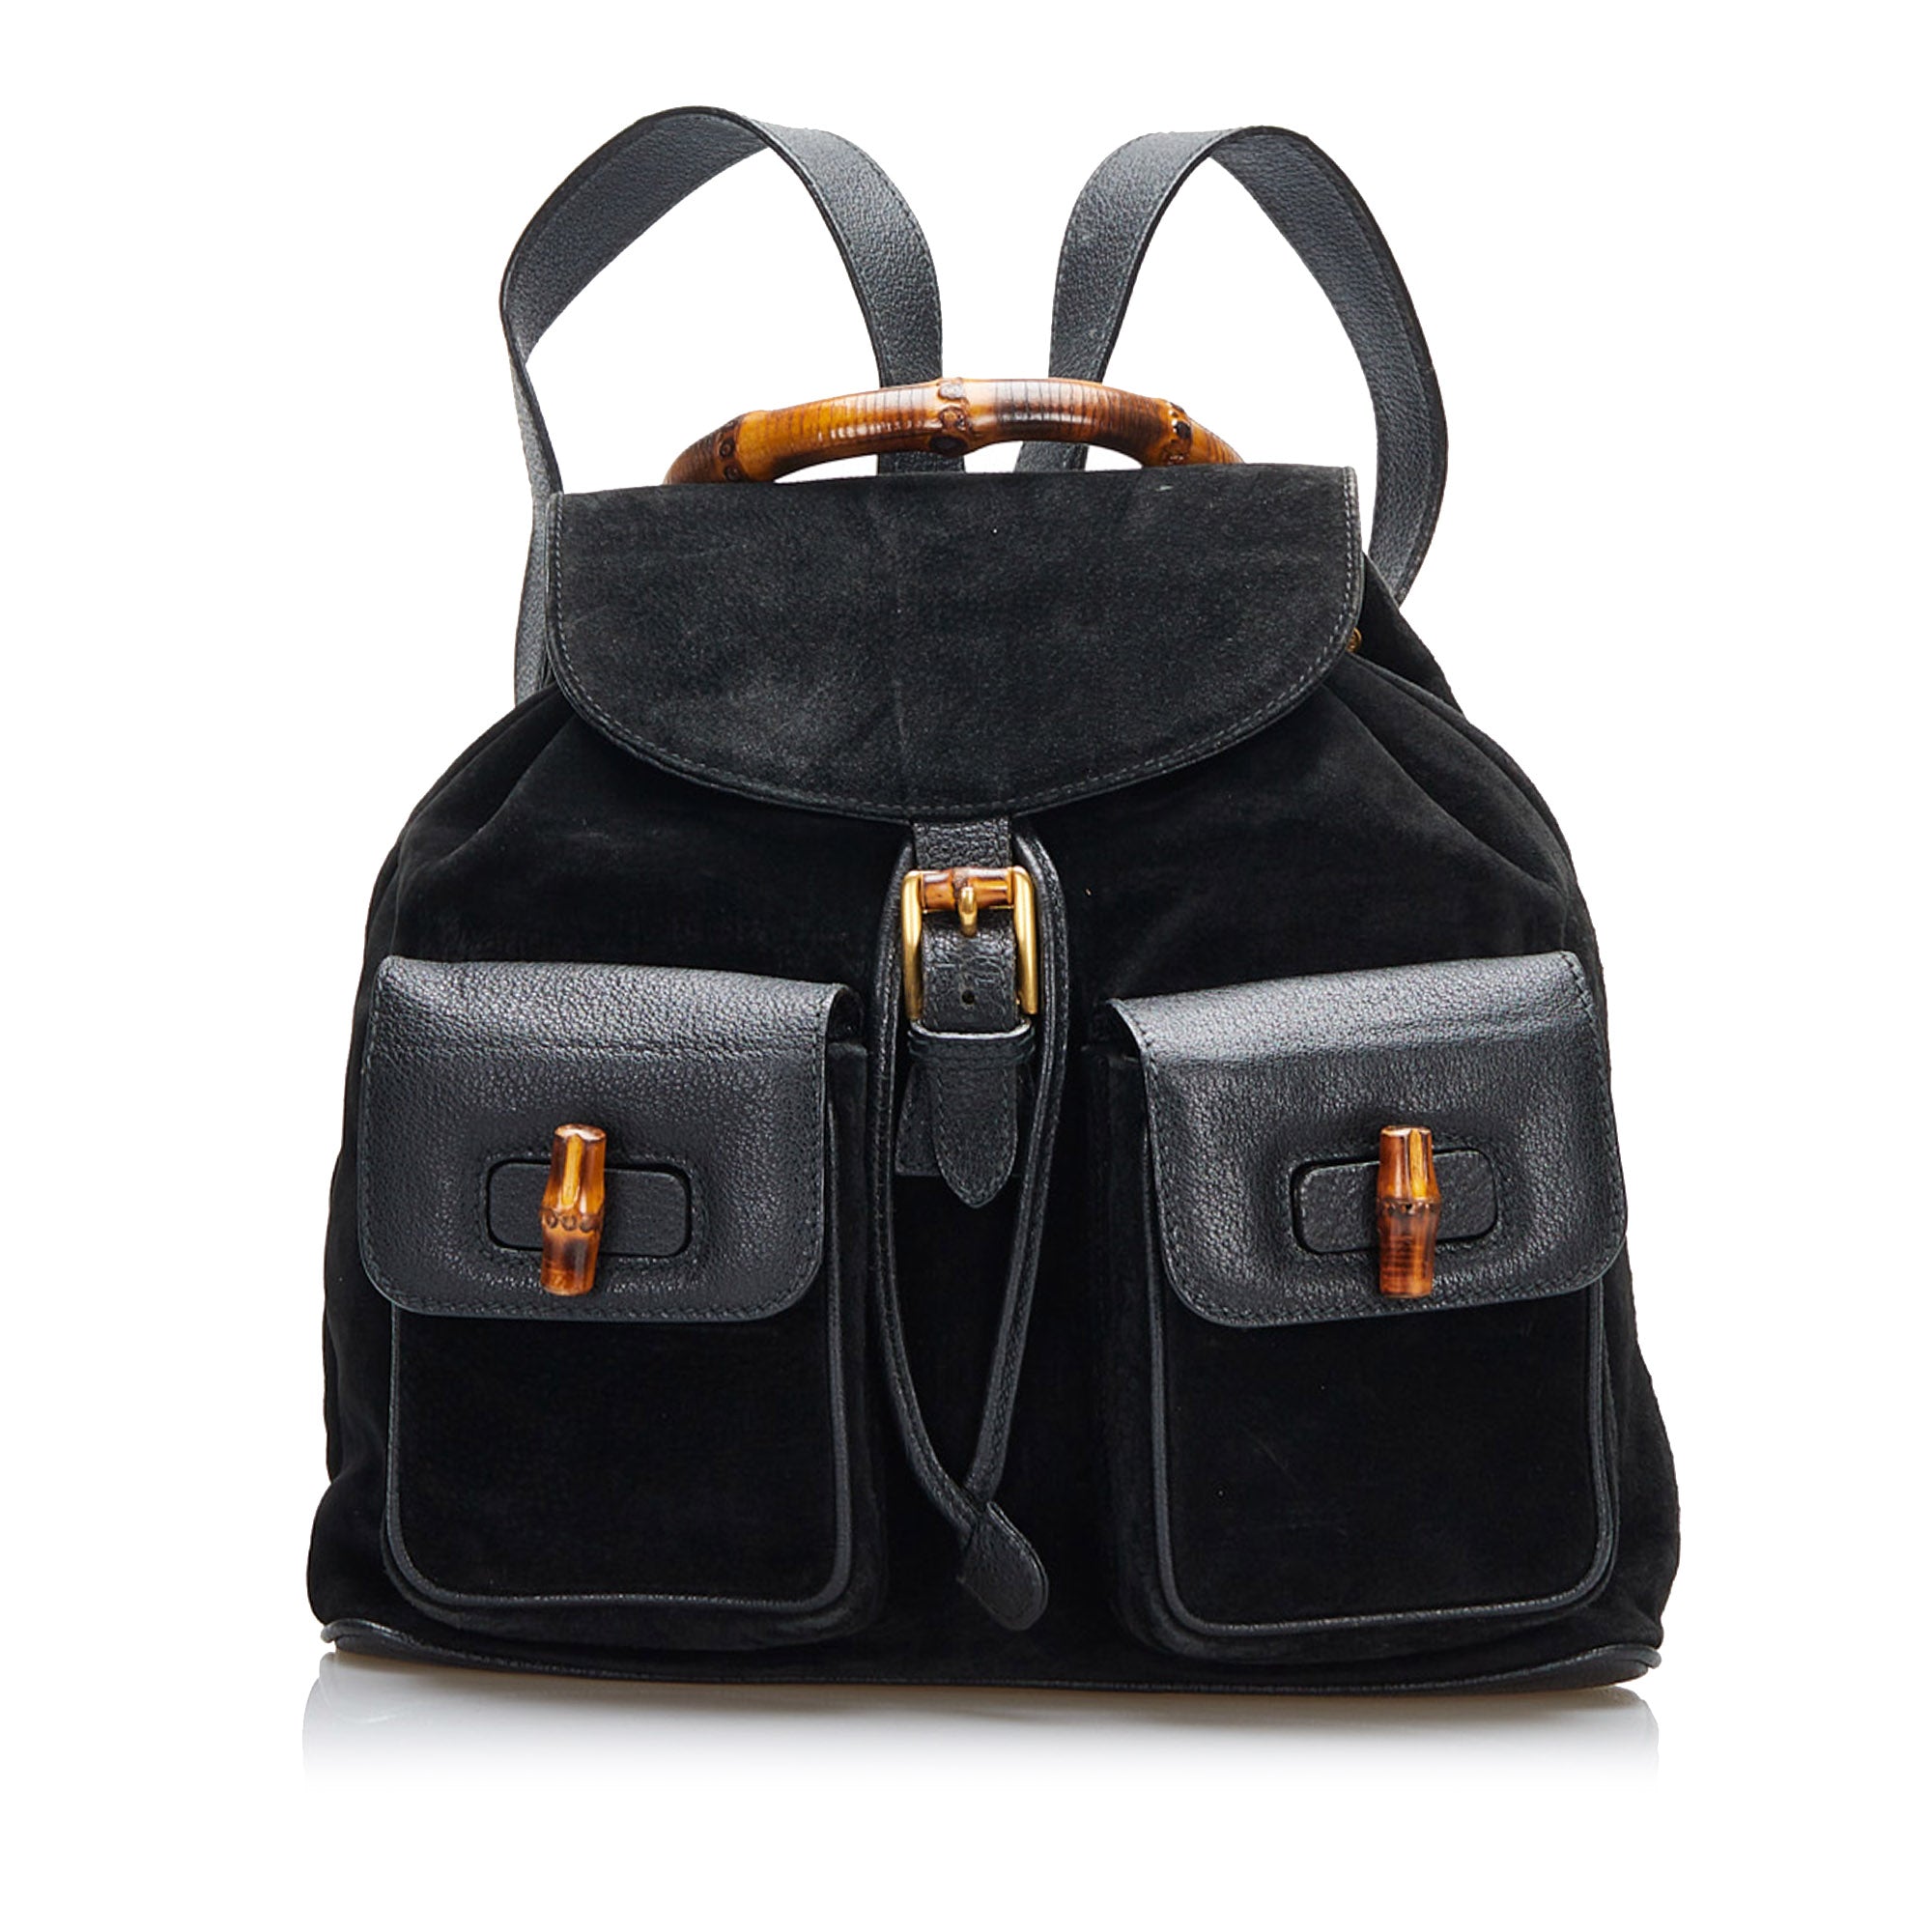 TOM FORD Men's Leather and Suede Backpack - Bergdorf Goodman